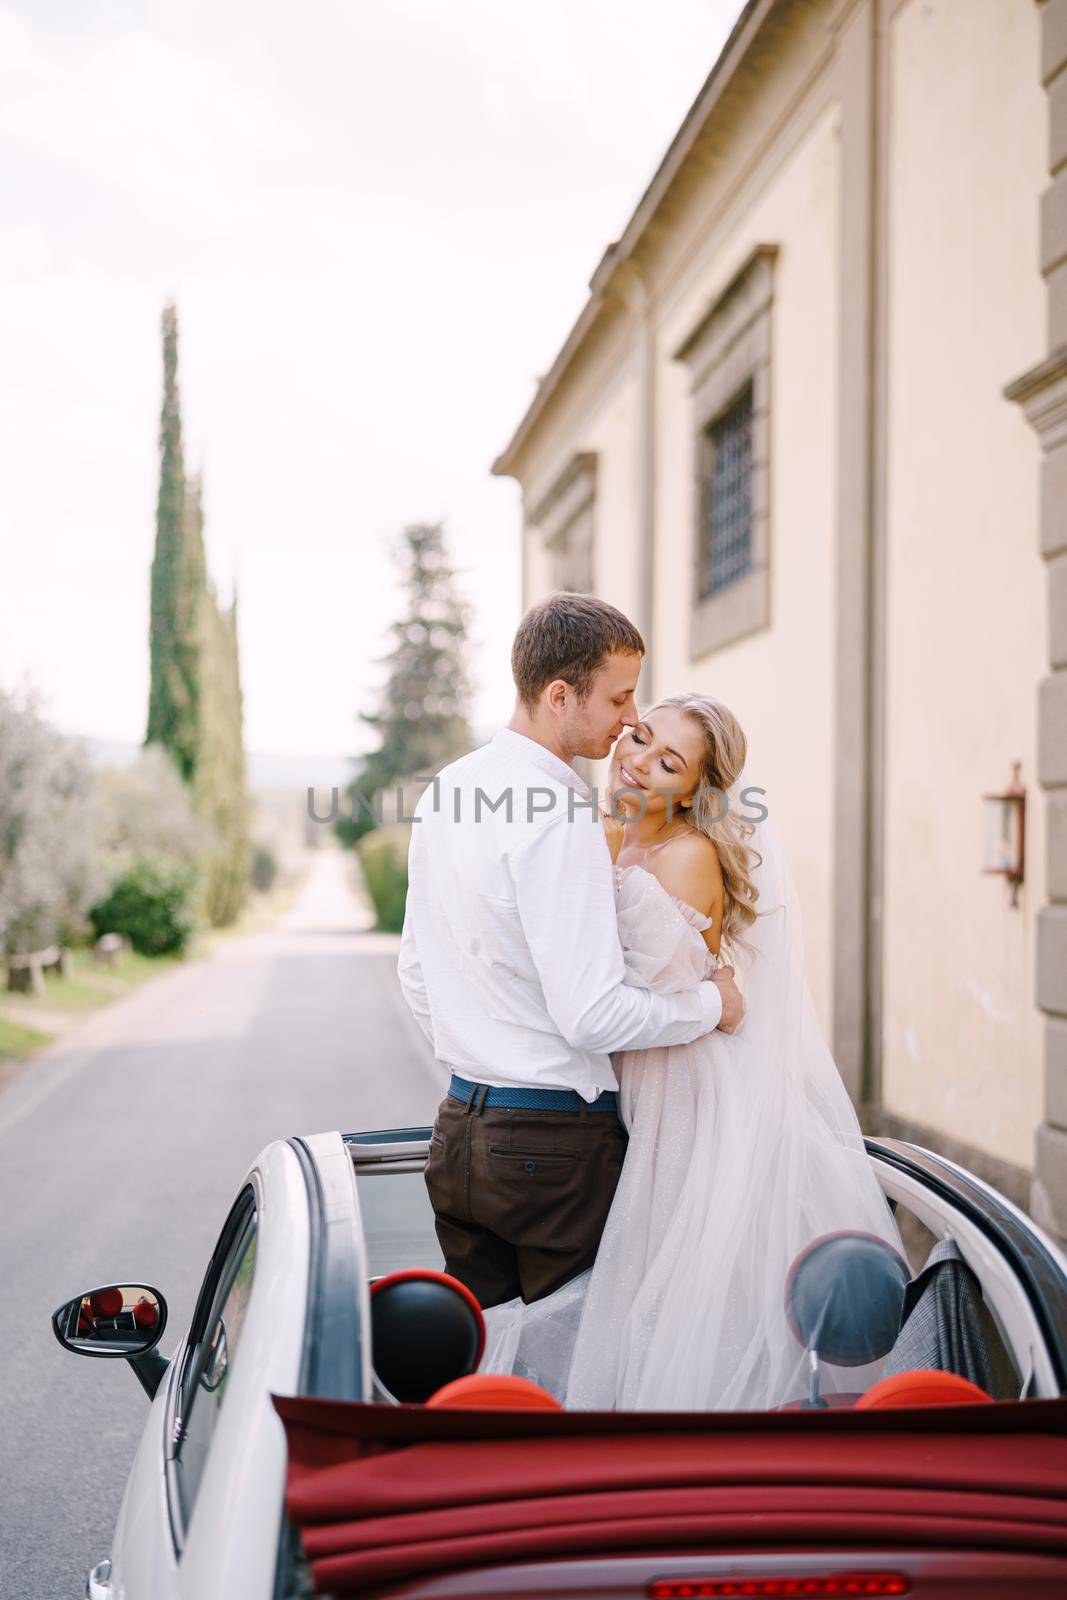 The bride and groom kiss in an open convertible. Wedding in Florence, Italy, in an old villa-winery. by Nadtochiy